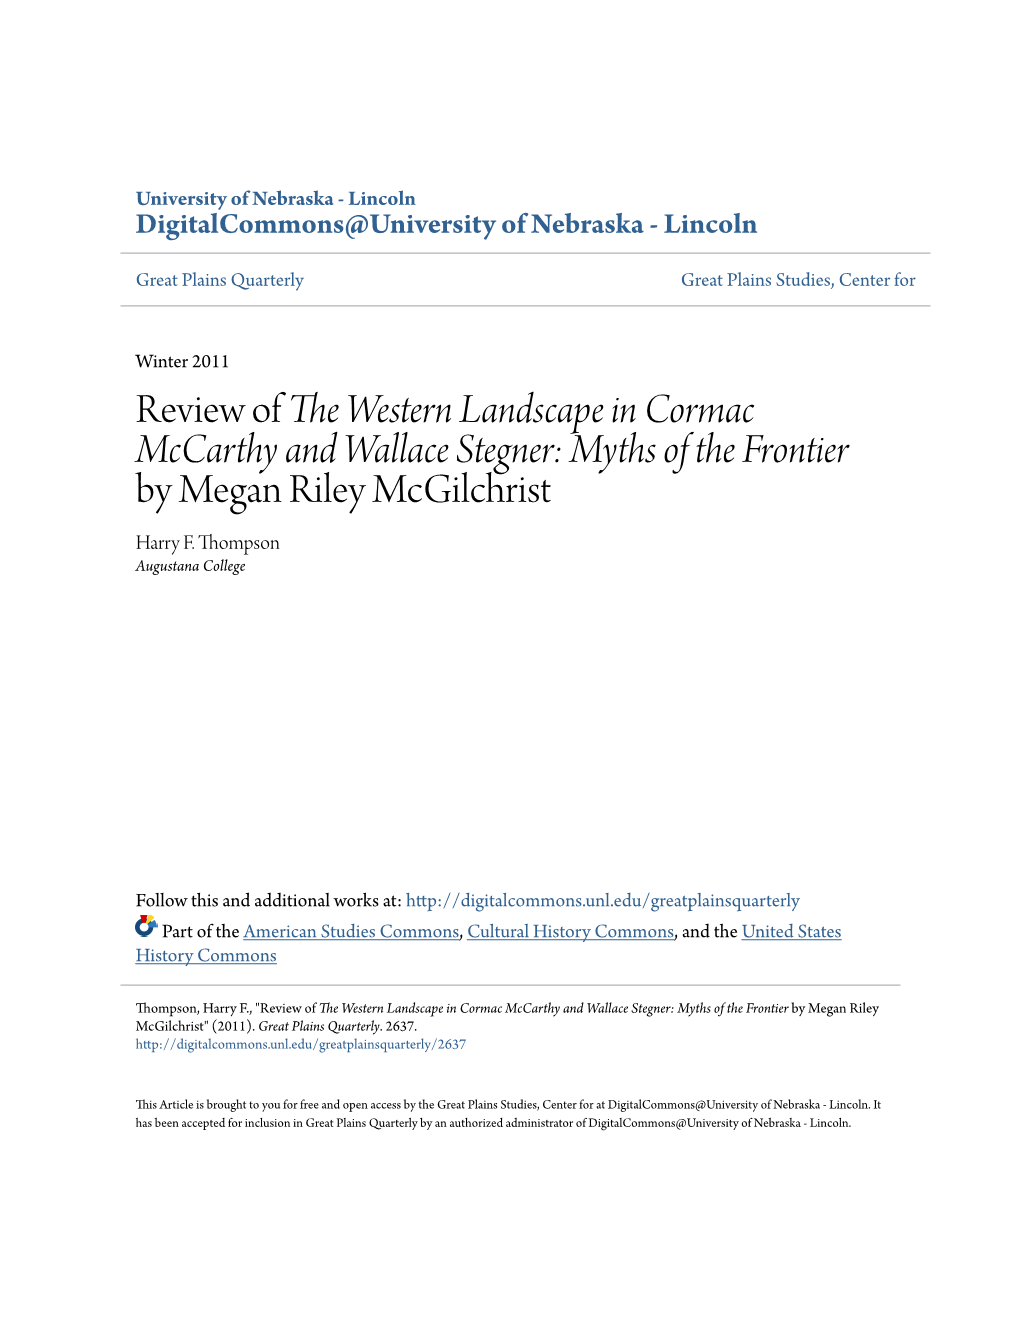 Review of the Western Landscape in Cormac Mccarthy and Wallace Stegner: Myths of the Frontier by Megan Riley Mcgilchrist Harry F